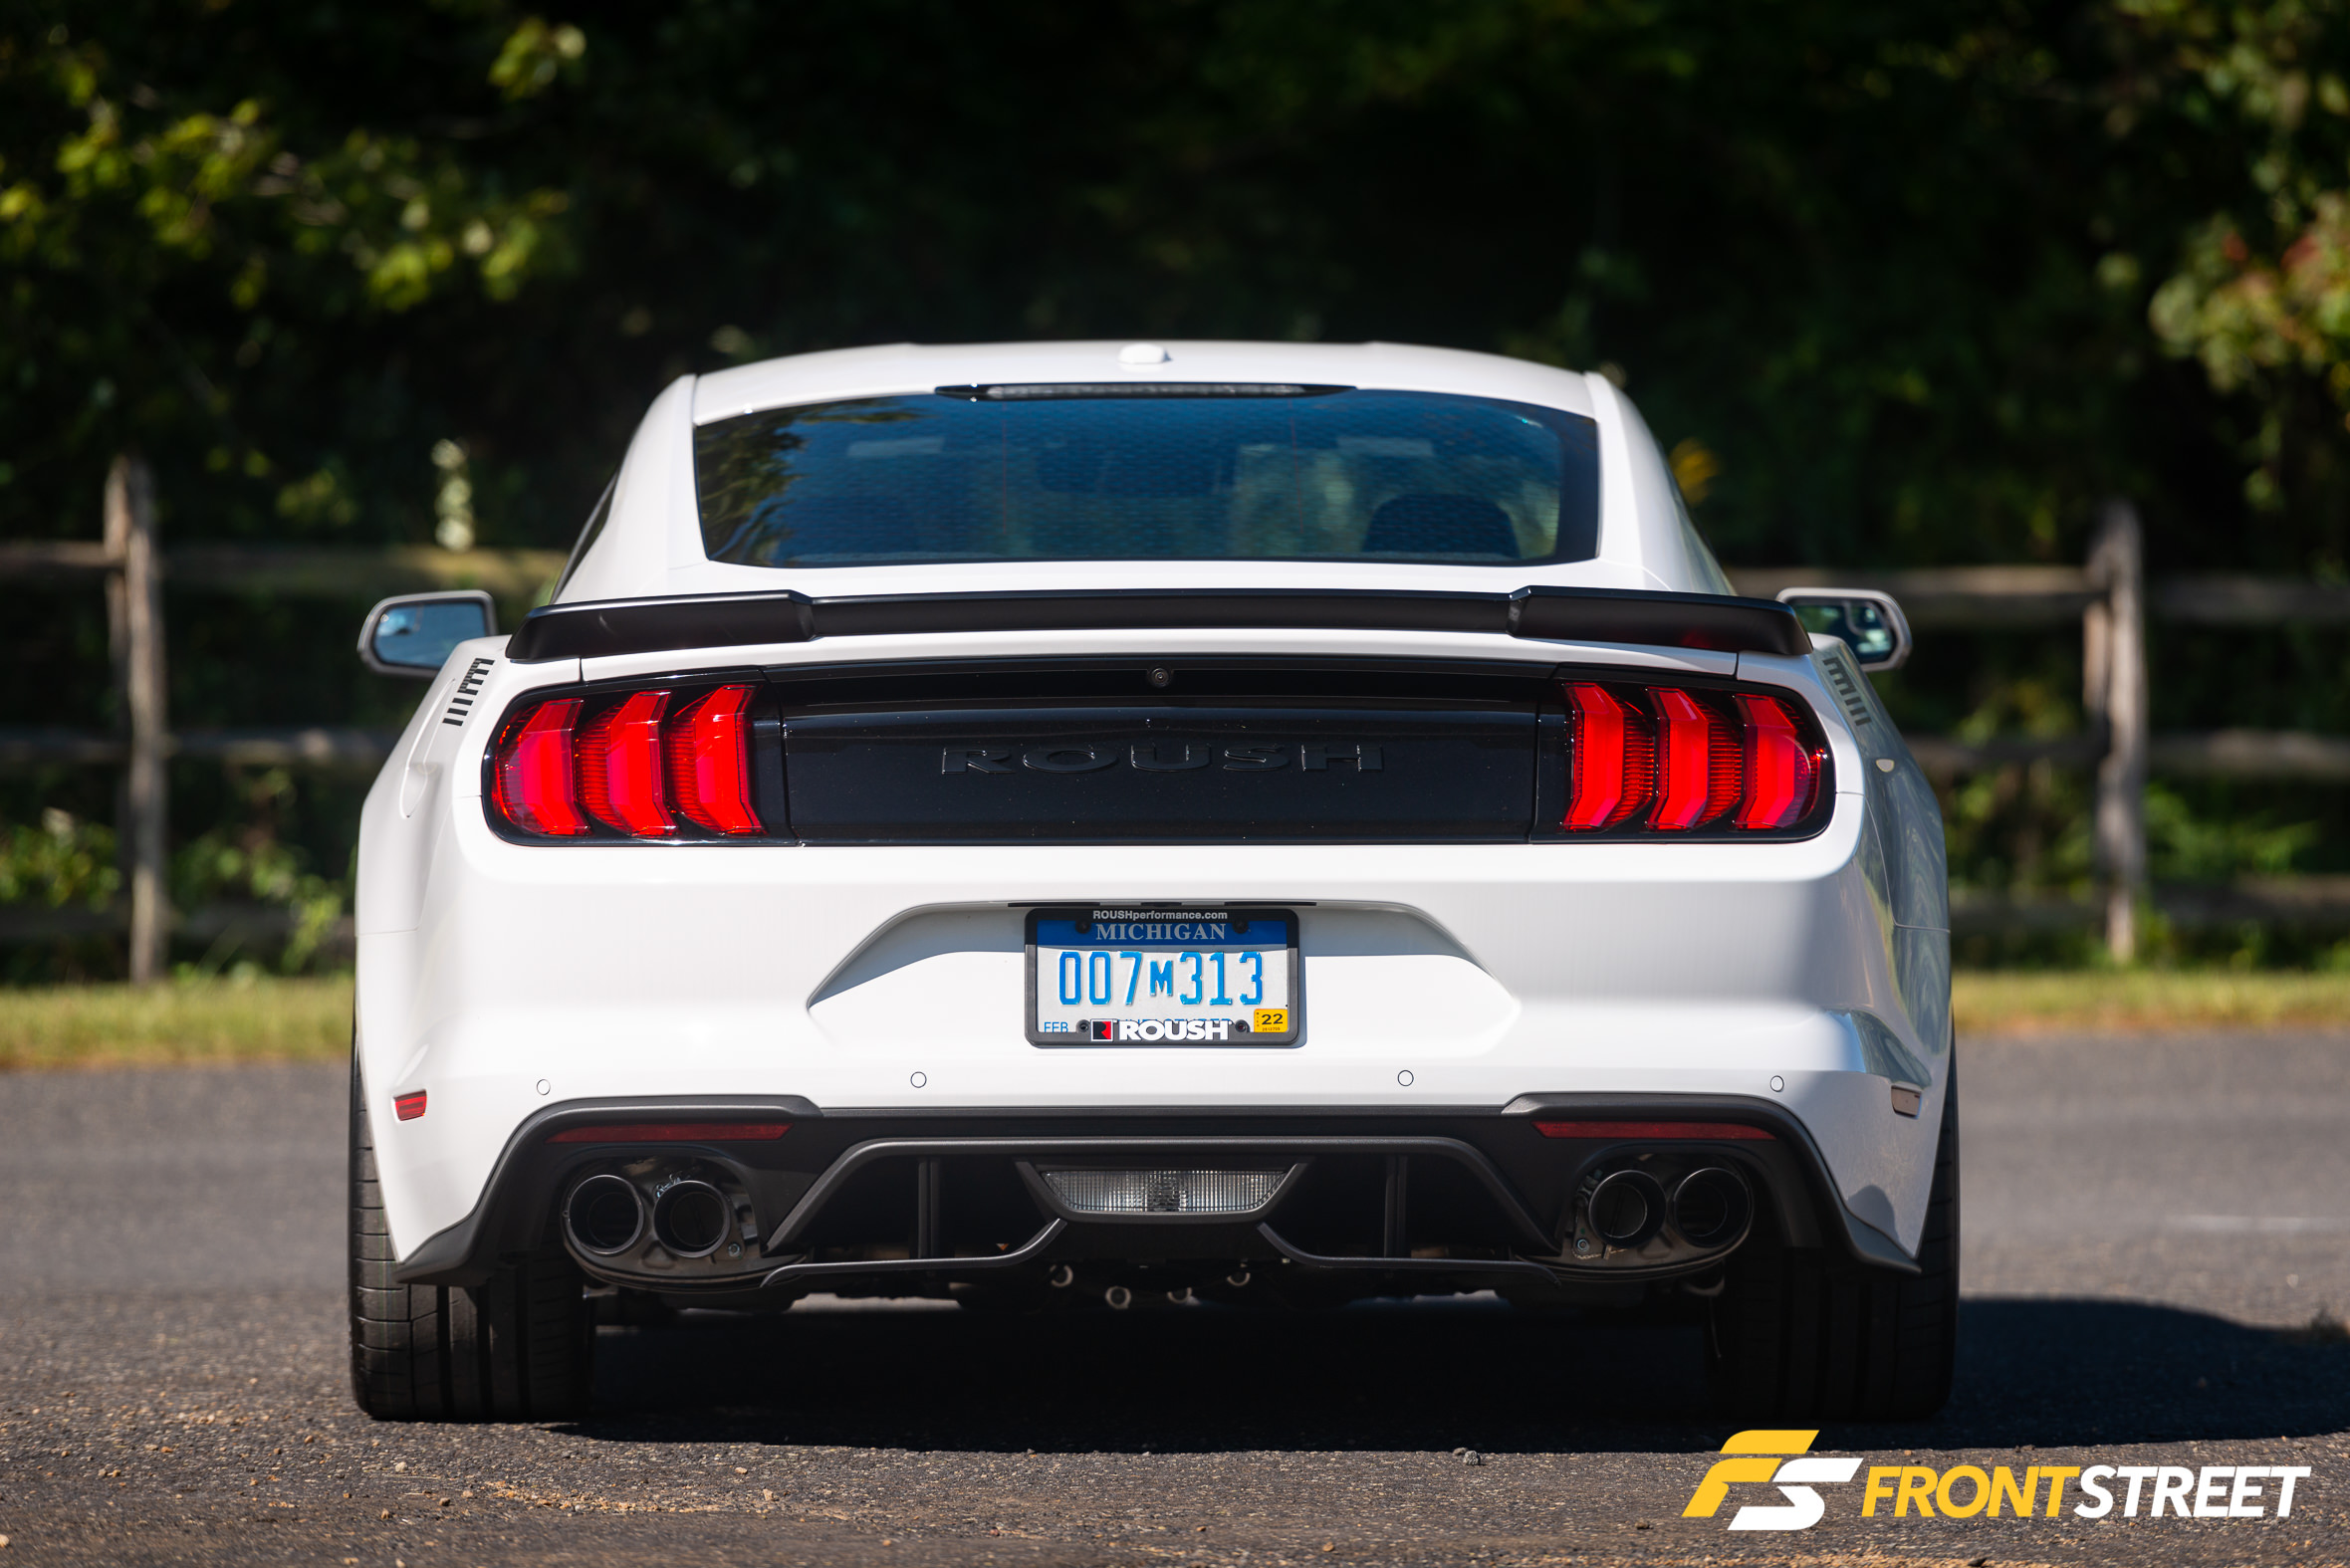 Wickedness With A Warranty: The 750 HP 2020 ROUSH Stage 3 Mustang